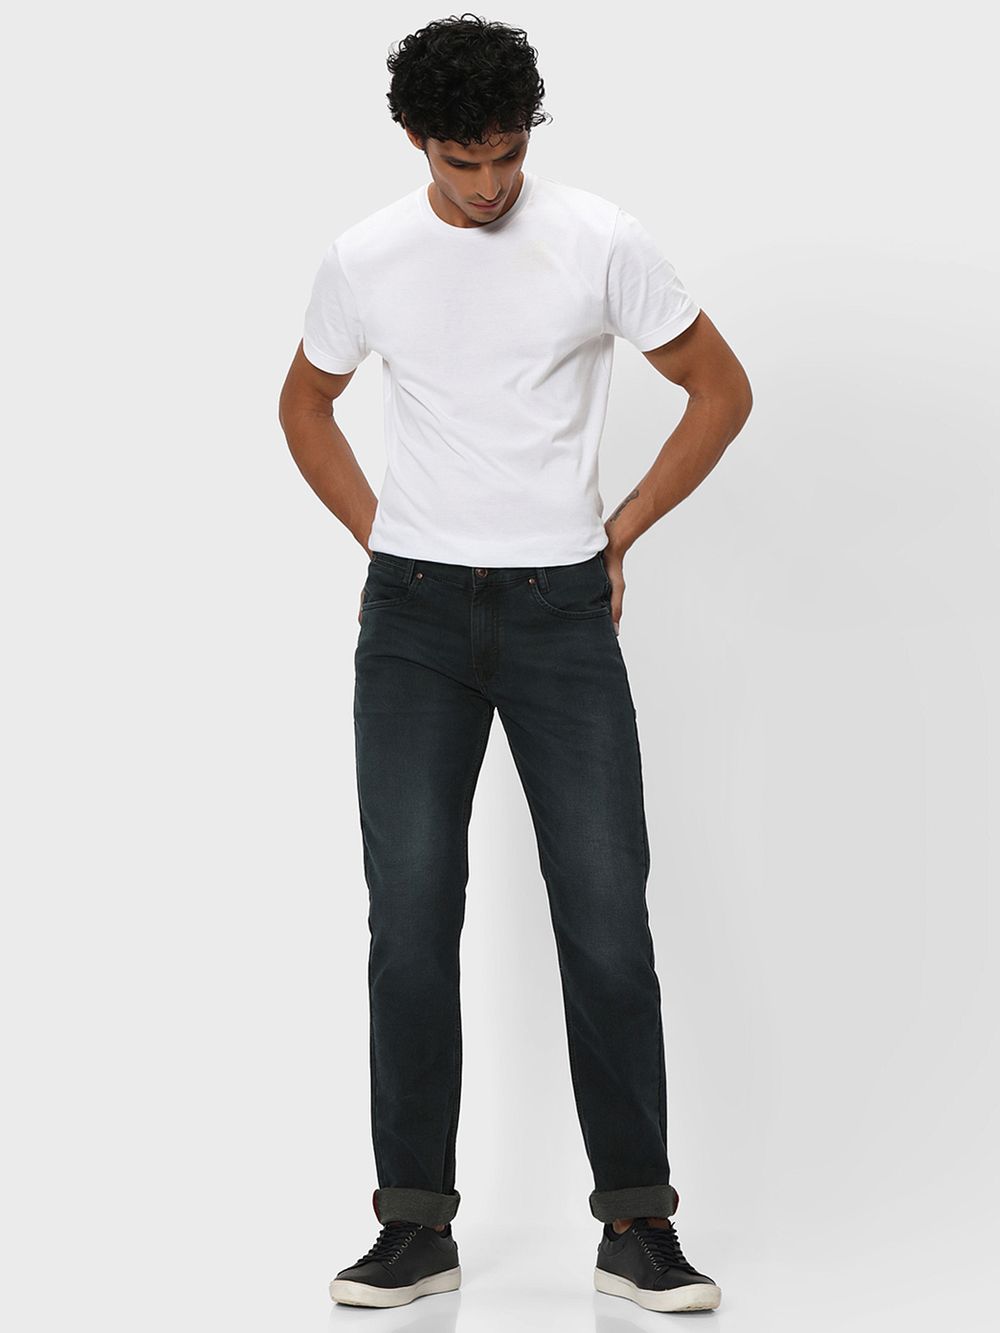 Olive Narrow Fit Denim Deluxe Stretch Jeans